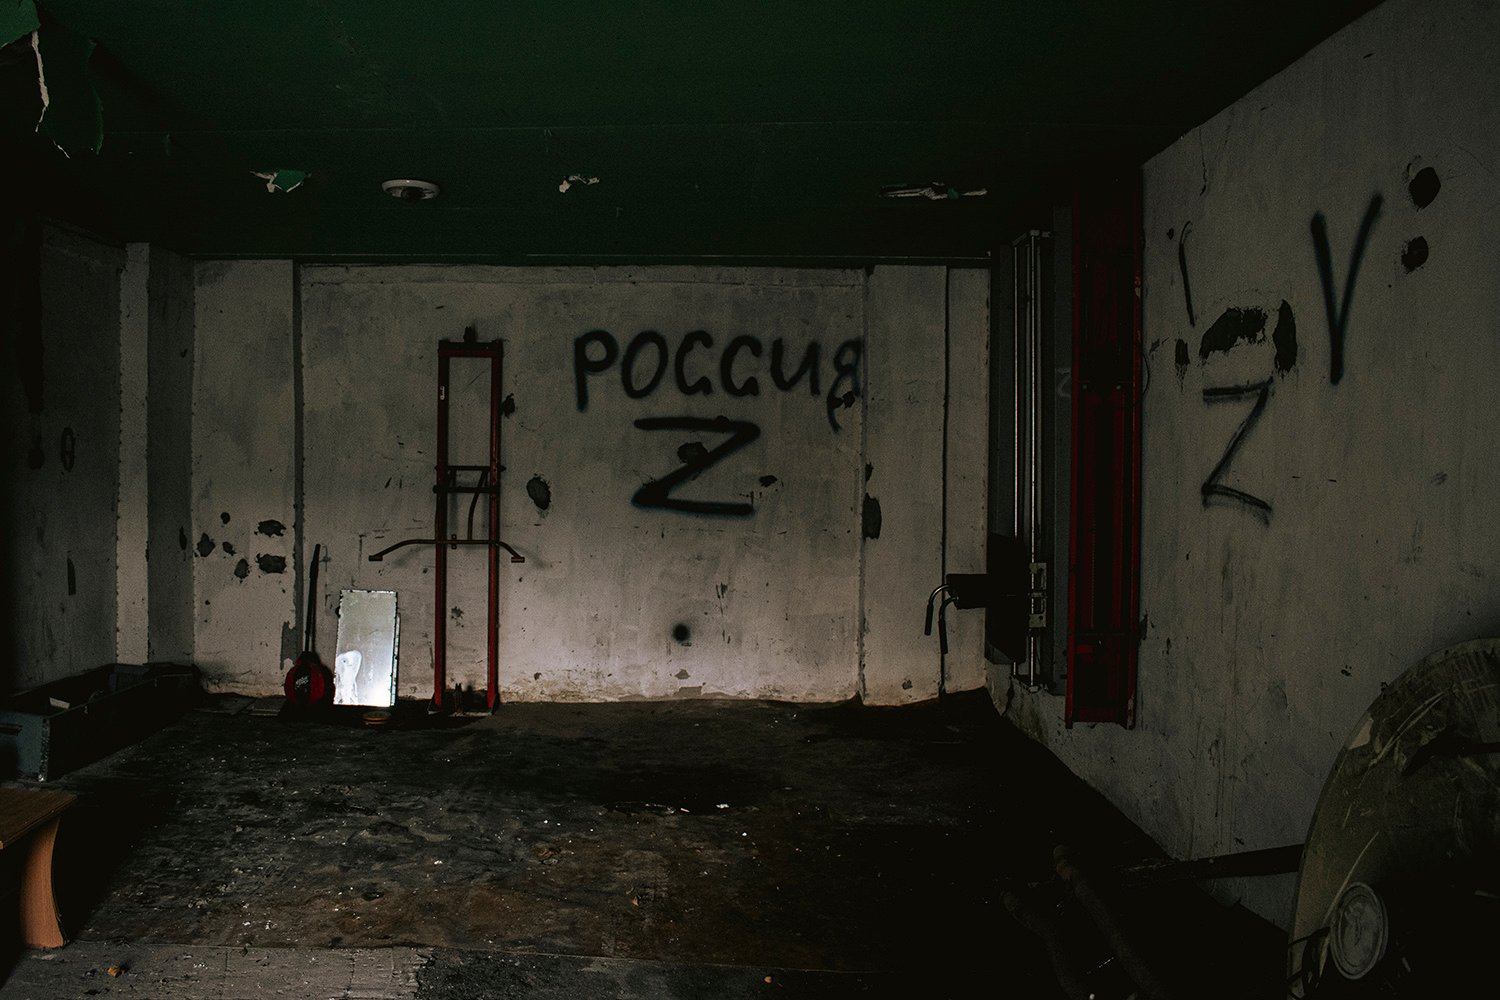 “Russia” and “Z” are scrawled on the walls of an alleged torture room in Ukraine.